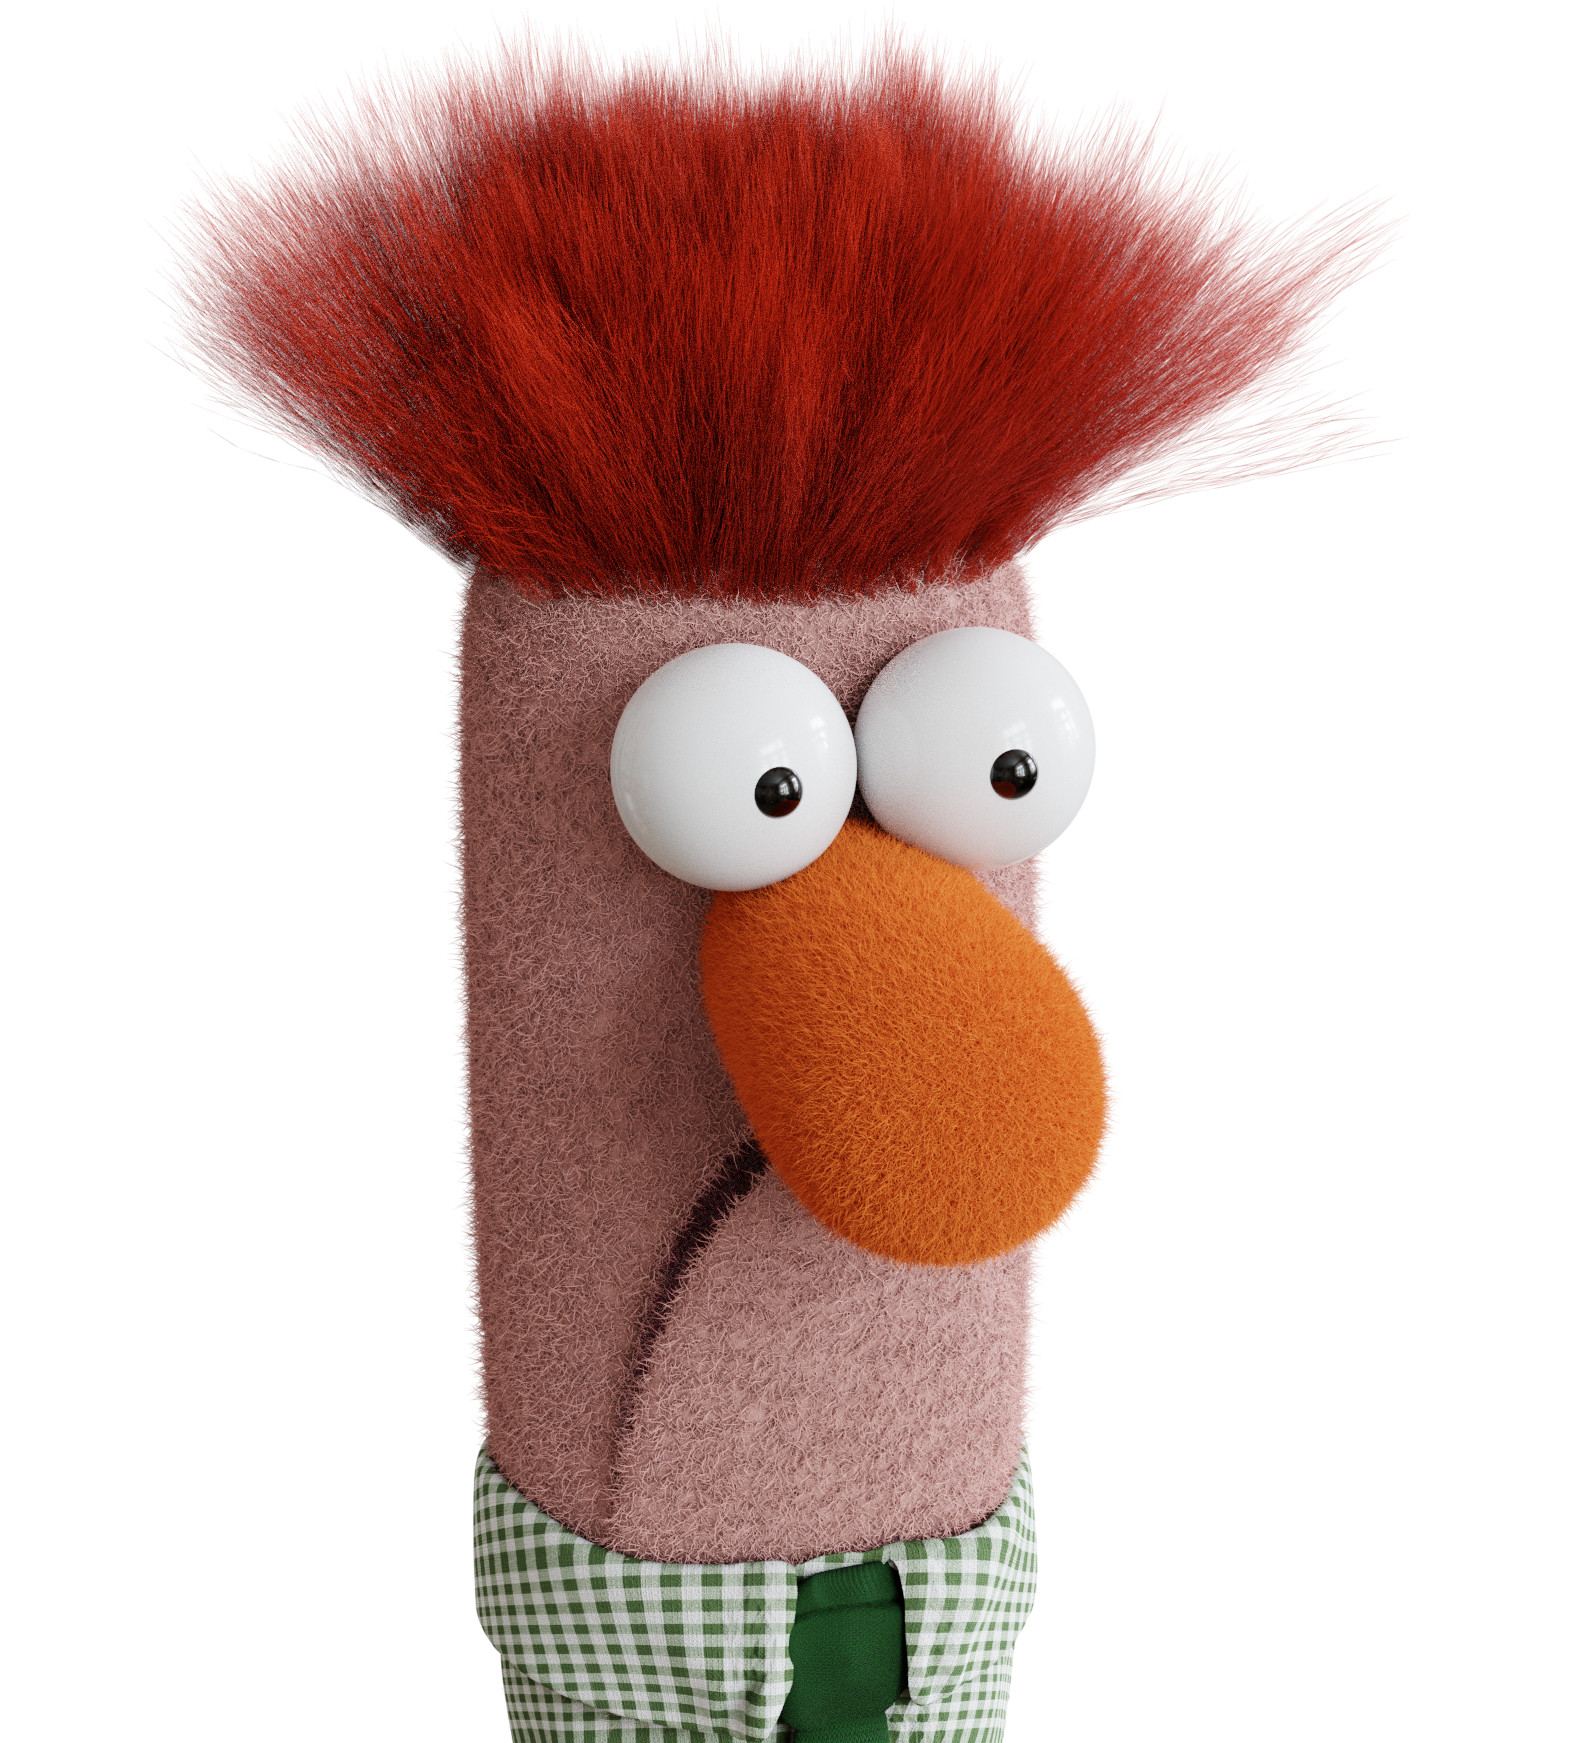 Beaker from The Muppet Show :) - Finished Projects - Blender